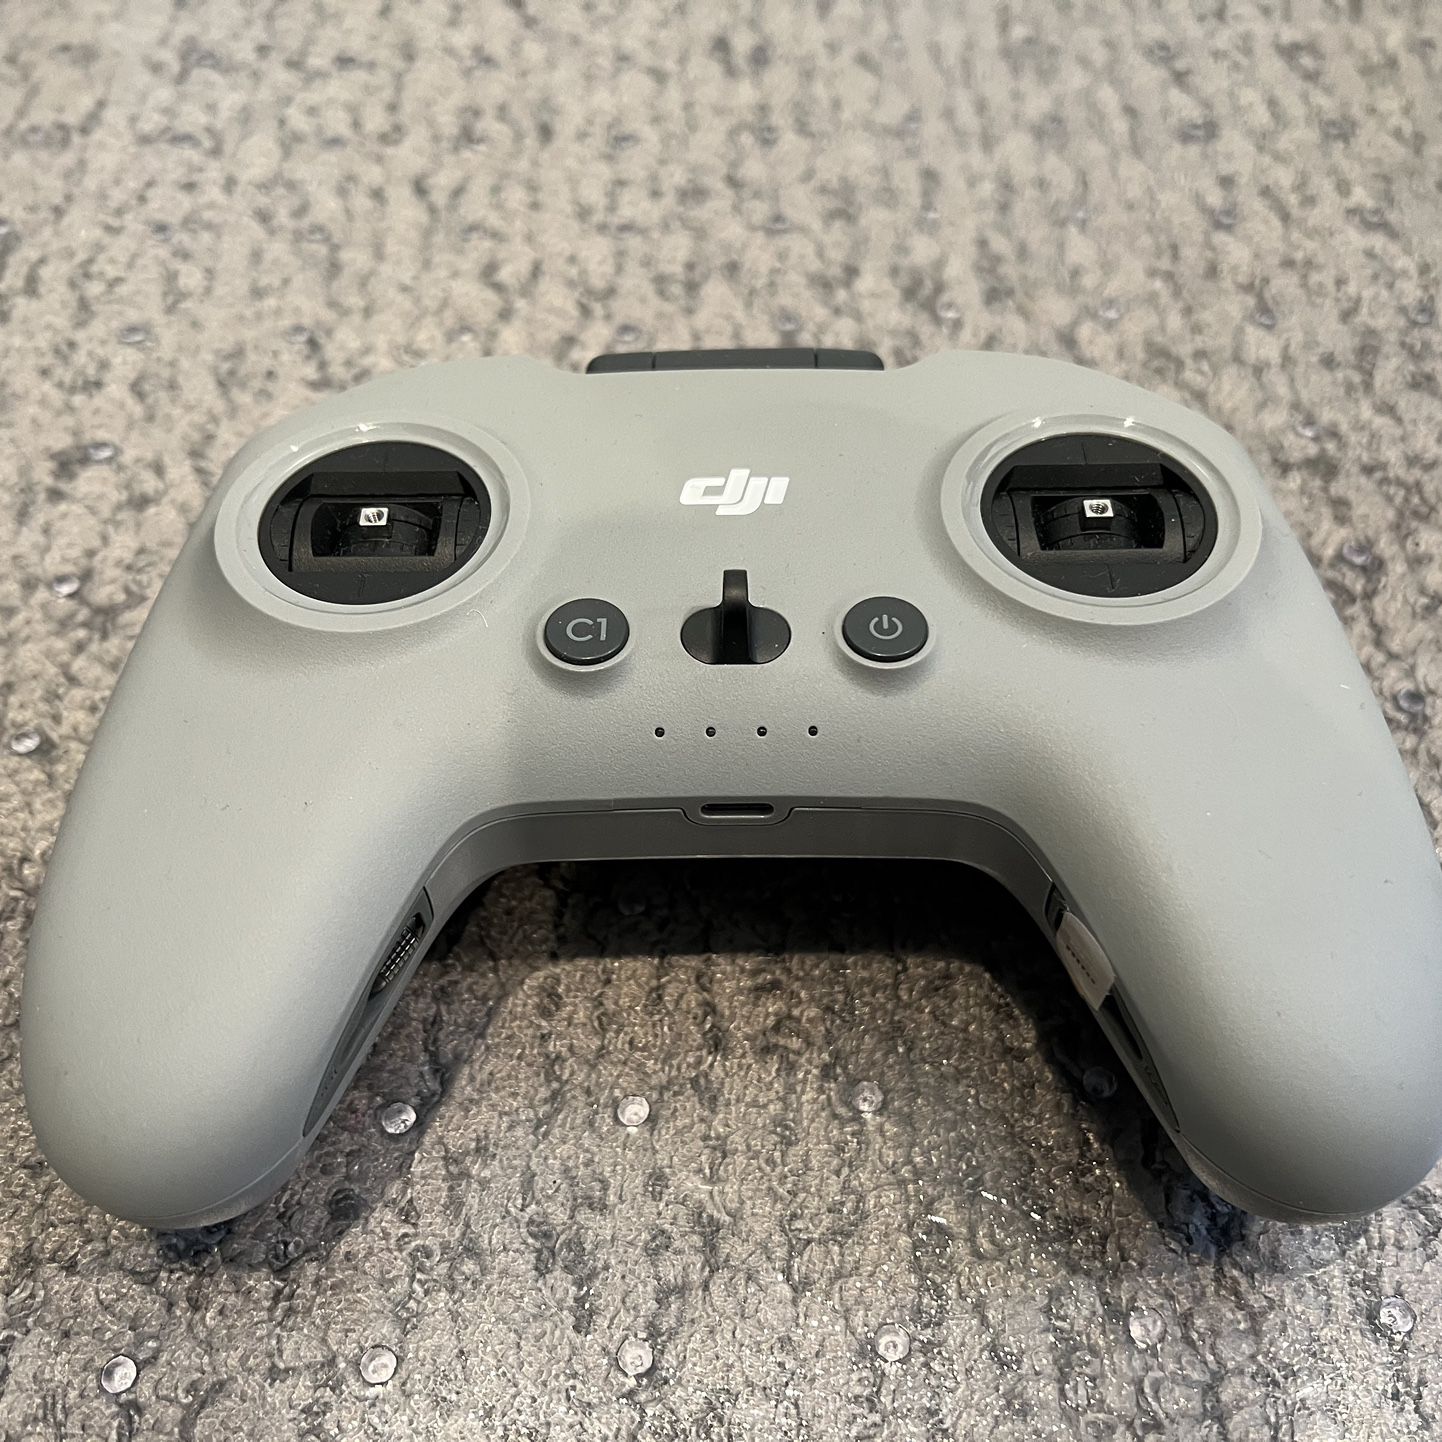 Dji Avata Fly More Combo ( With Motion Controller & Regular Controller )  for Sale in Carrollton, TX - OfferUp